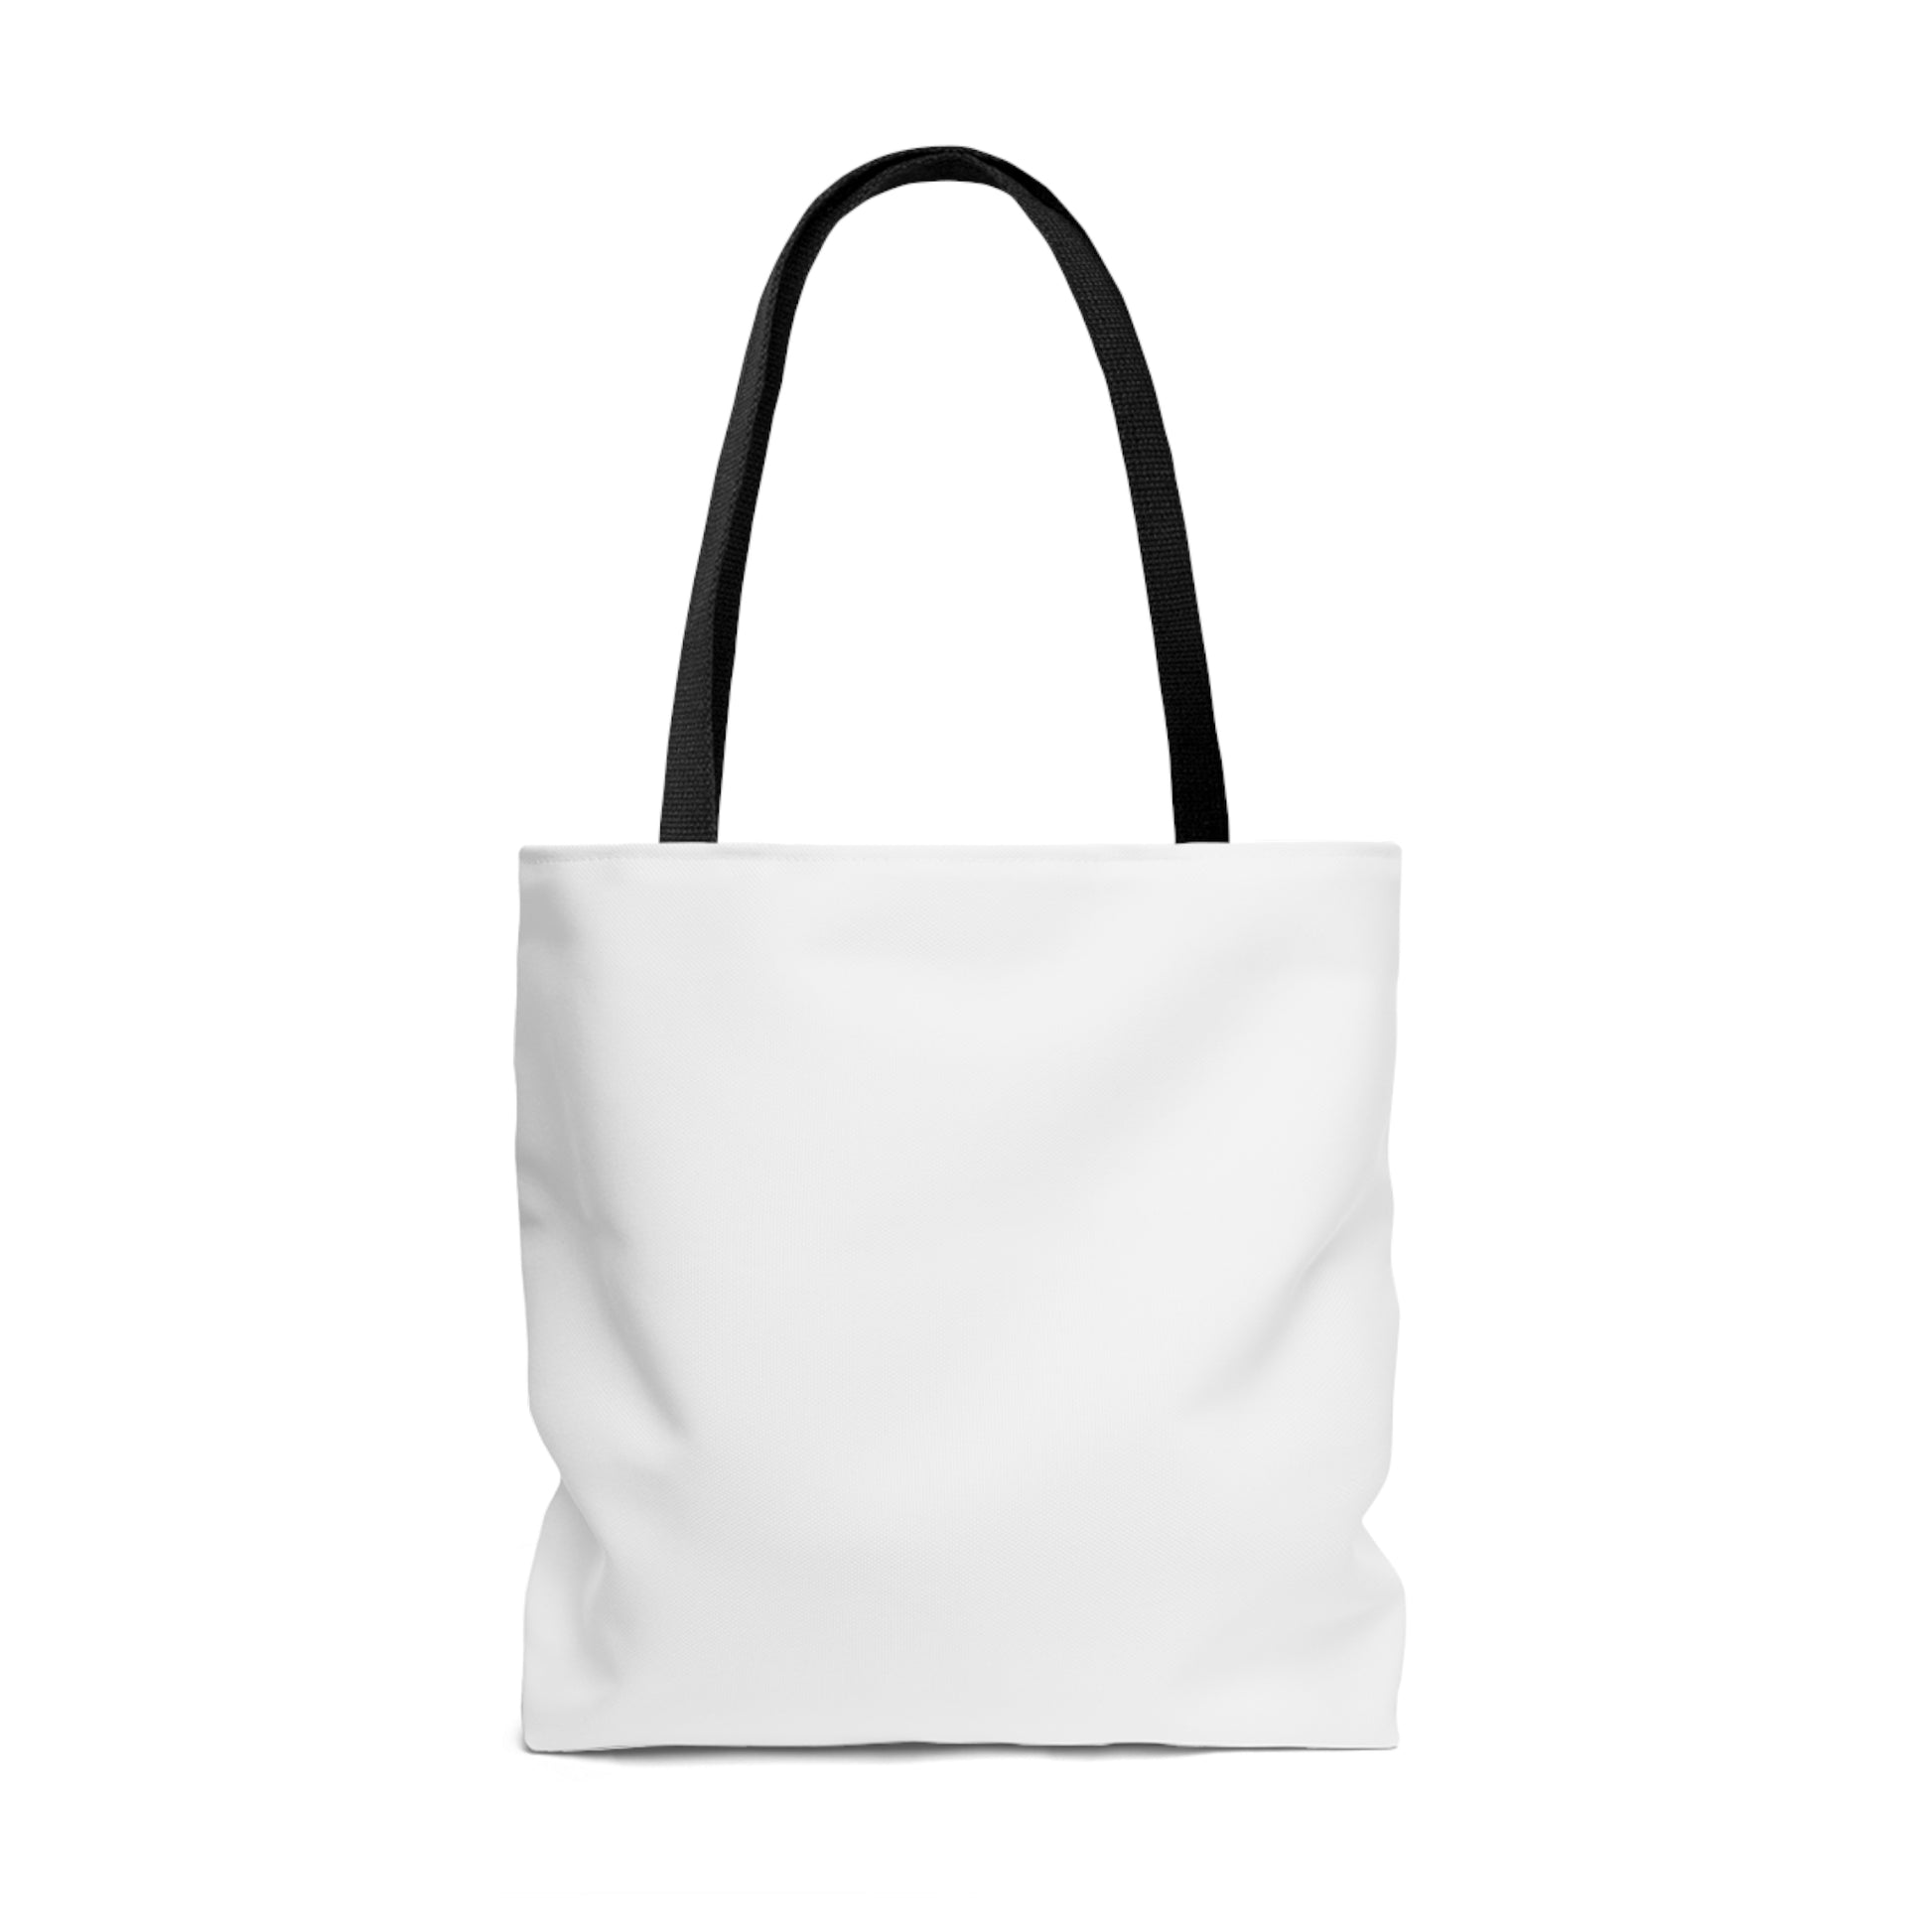 Back side of a white tote bag